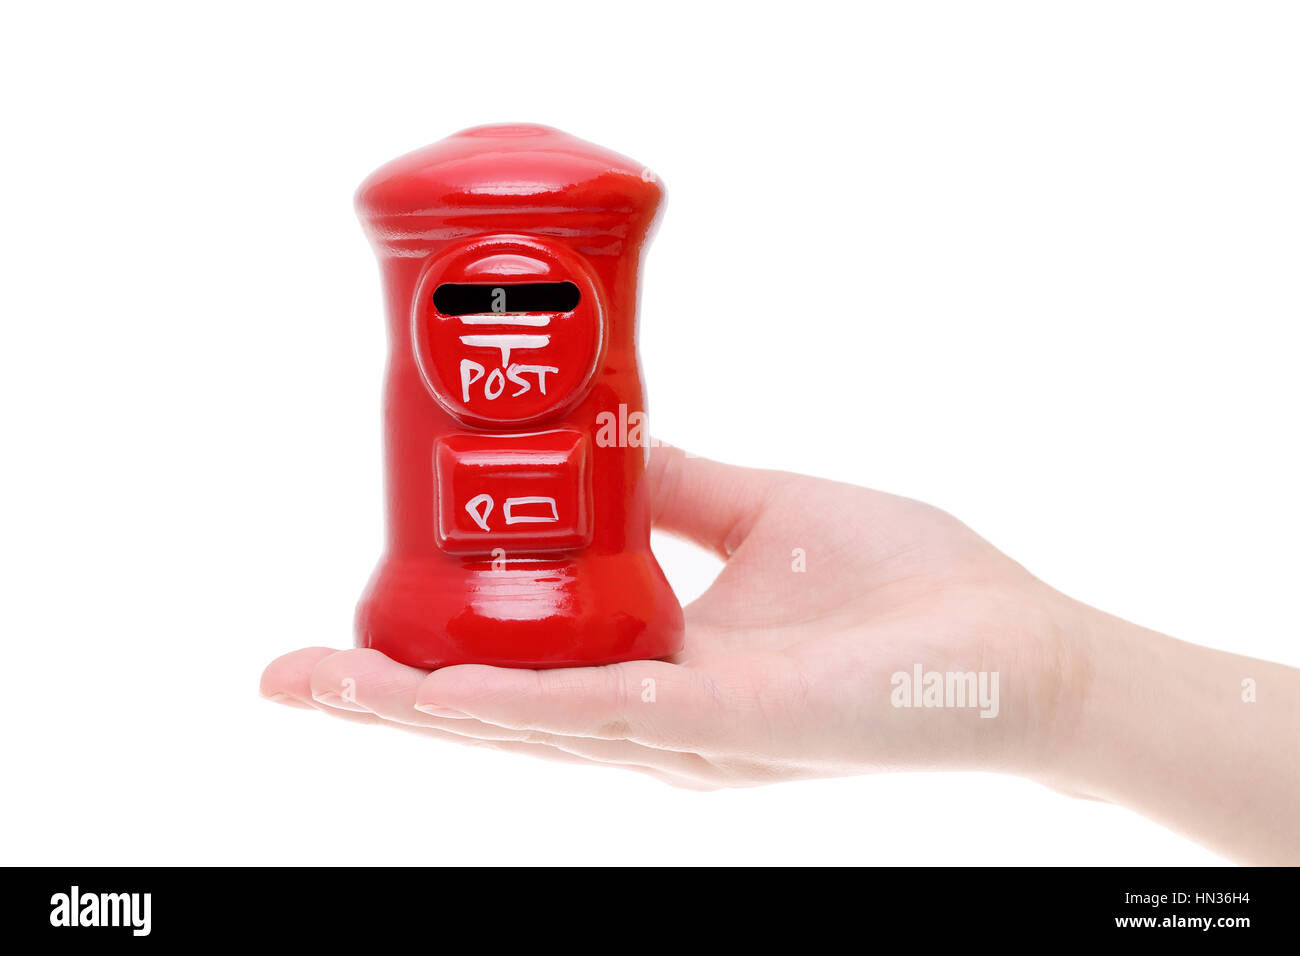 red toy post box on the hand isolated on white background Stock Photo